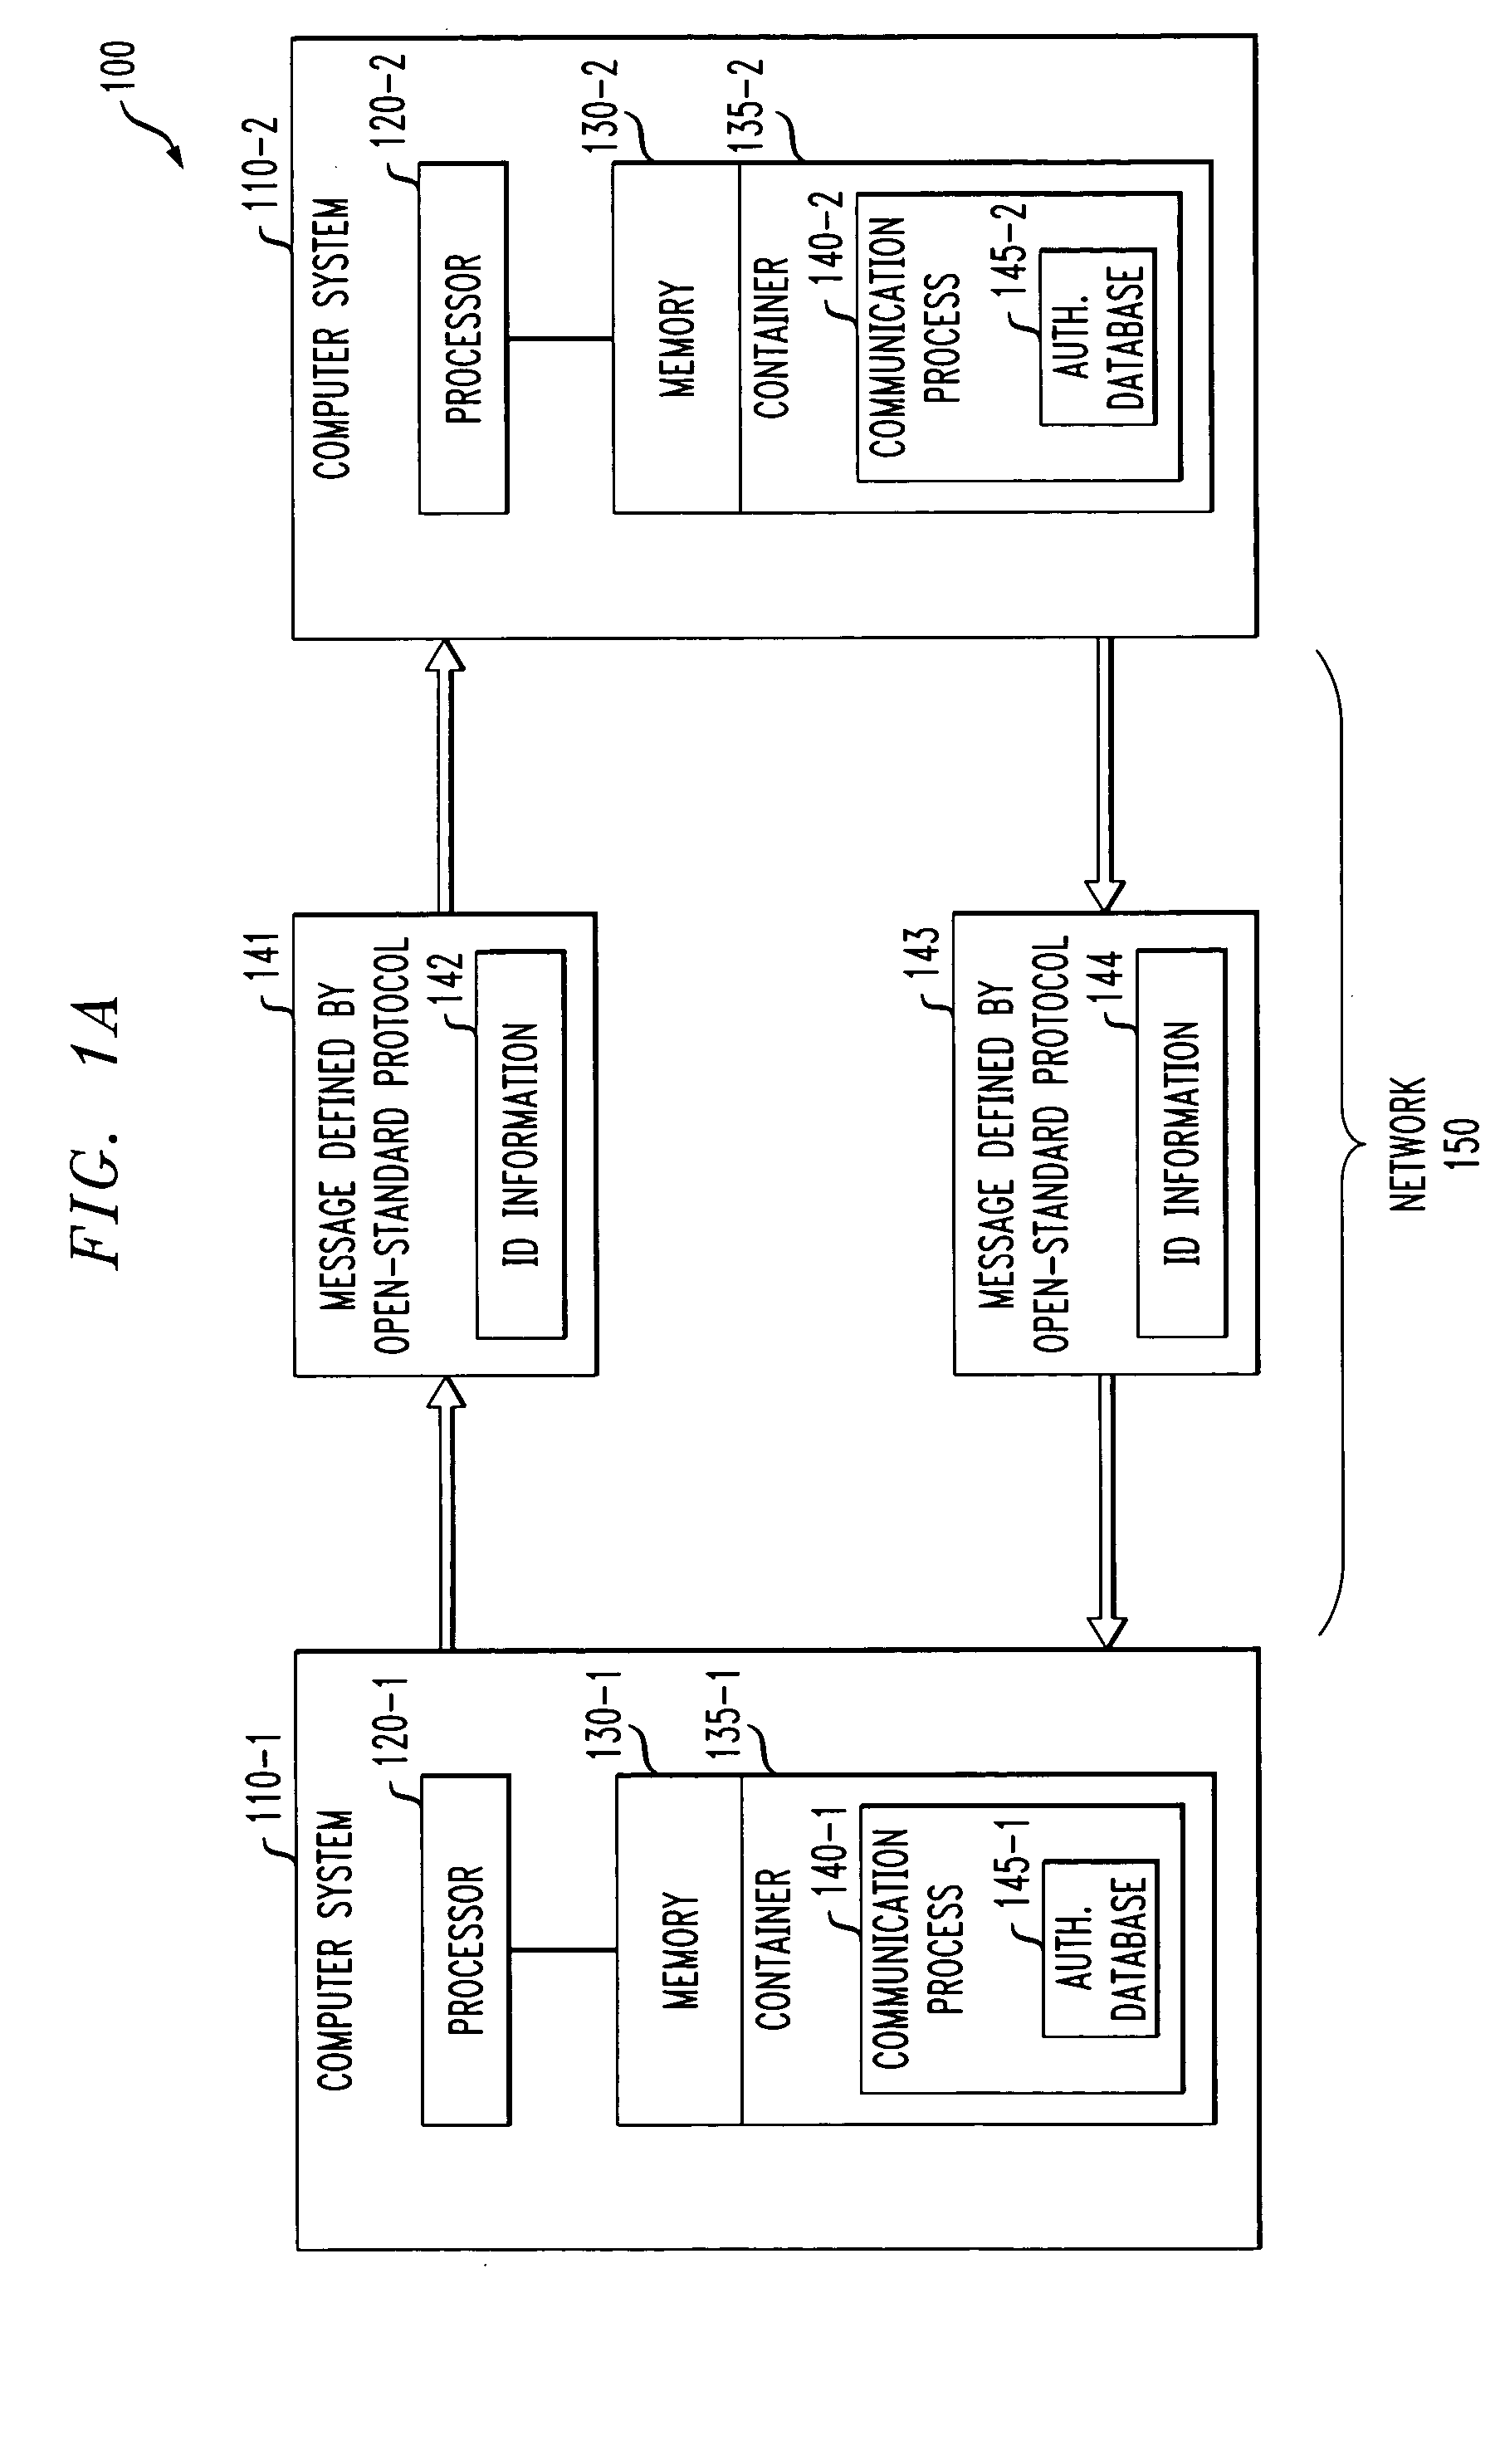 Transparent coupling between compatible containers communicating over networks